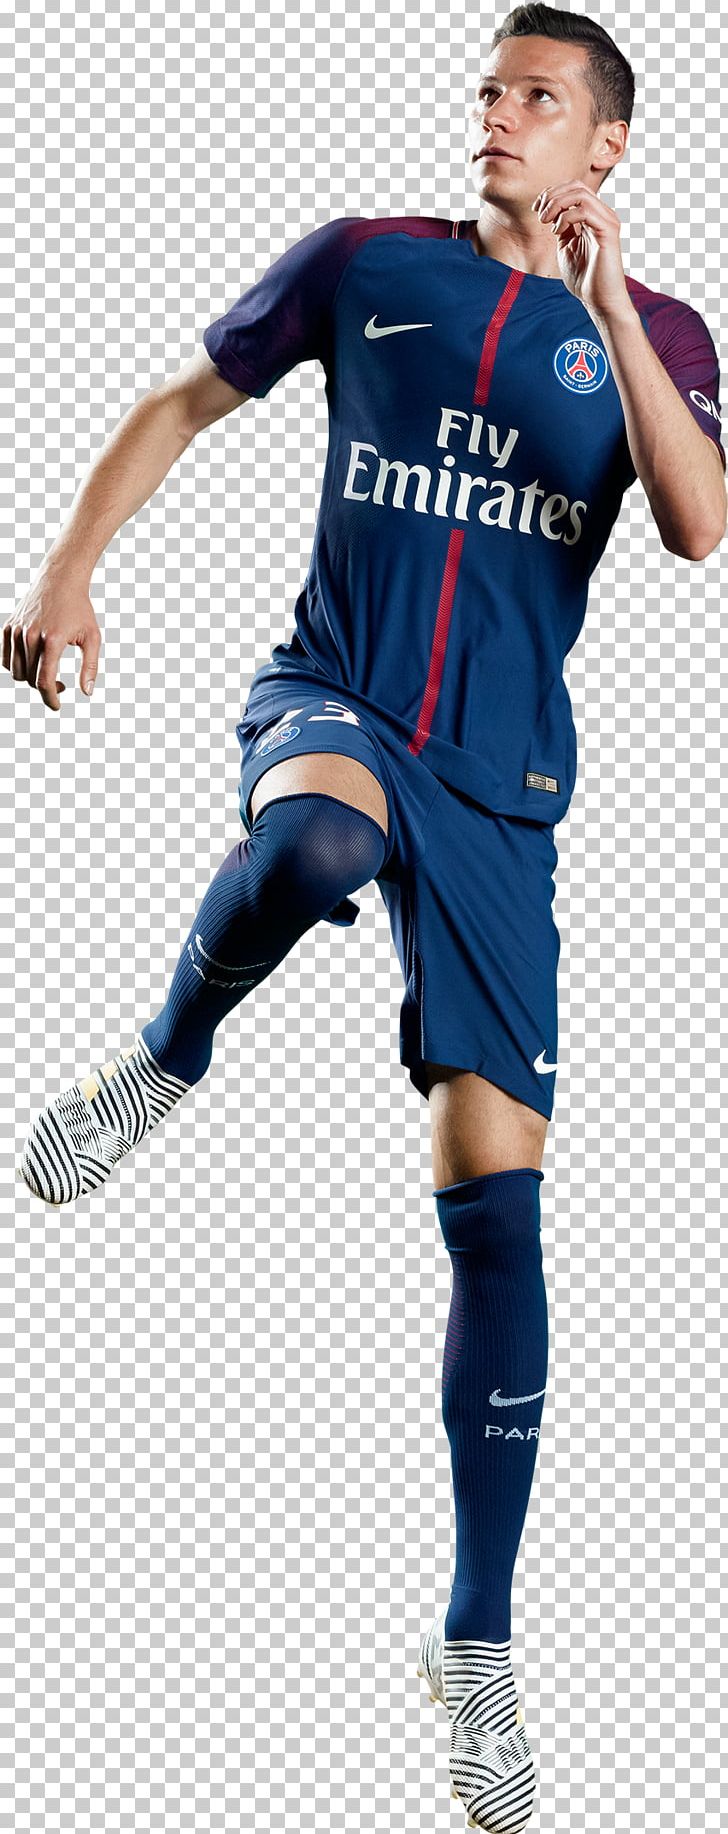 Julian Draxler Paris Saint-Germain F.C. Football Player Team Sport PNG, Clipart, Argentina National Football Team, Blue, Cleat, Clothing, Electric Blue Free PNG Download